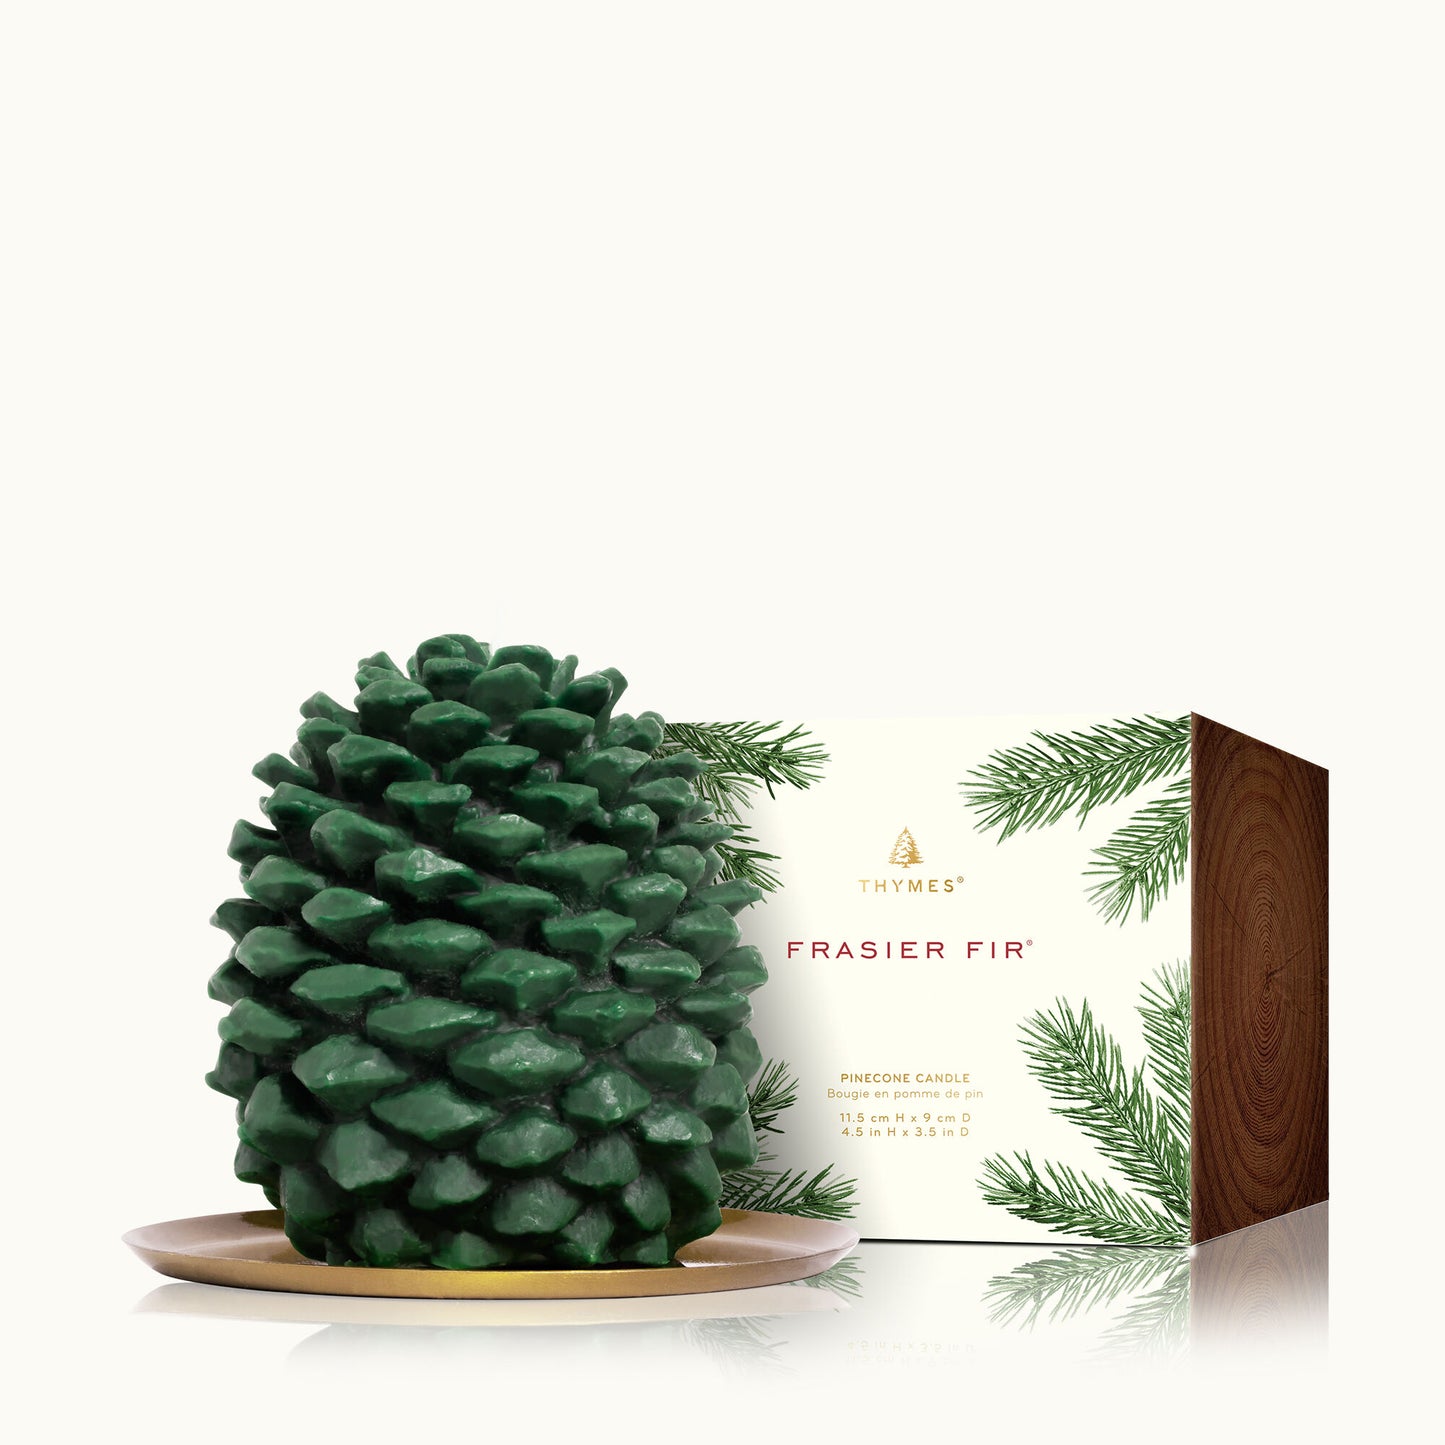 Frasier Fir Petite Molded Pinecone Candle display